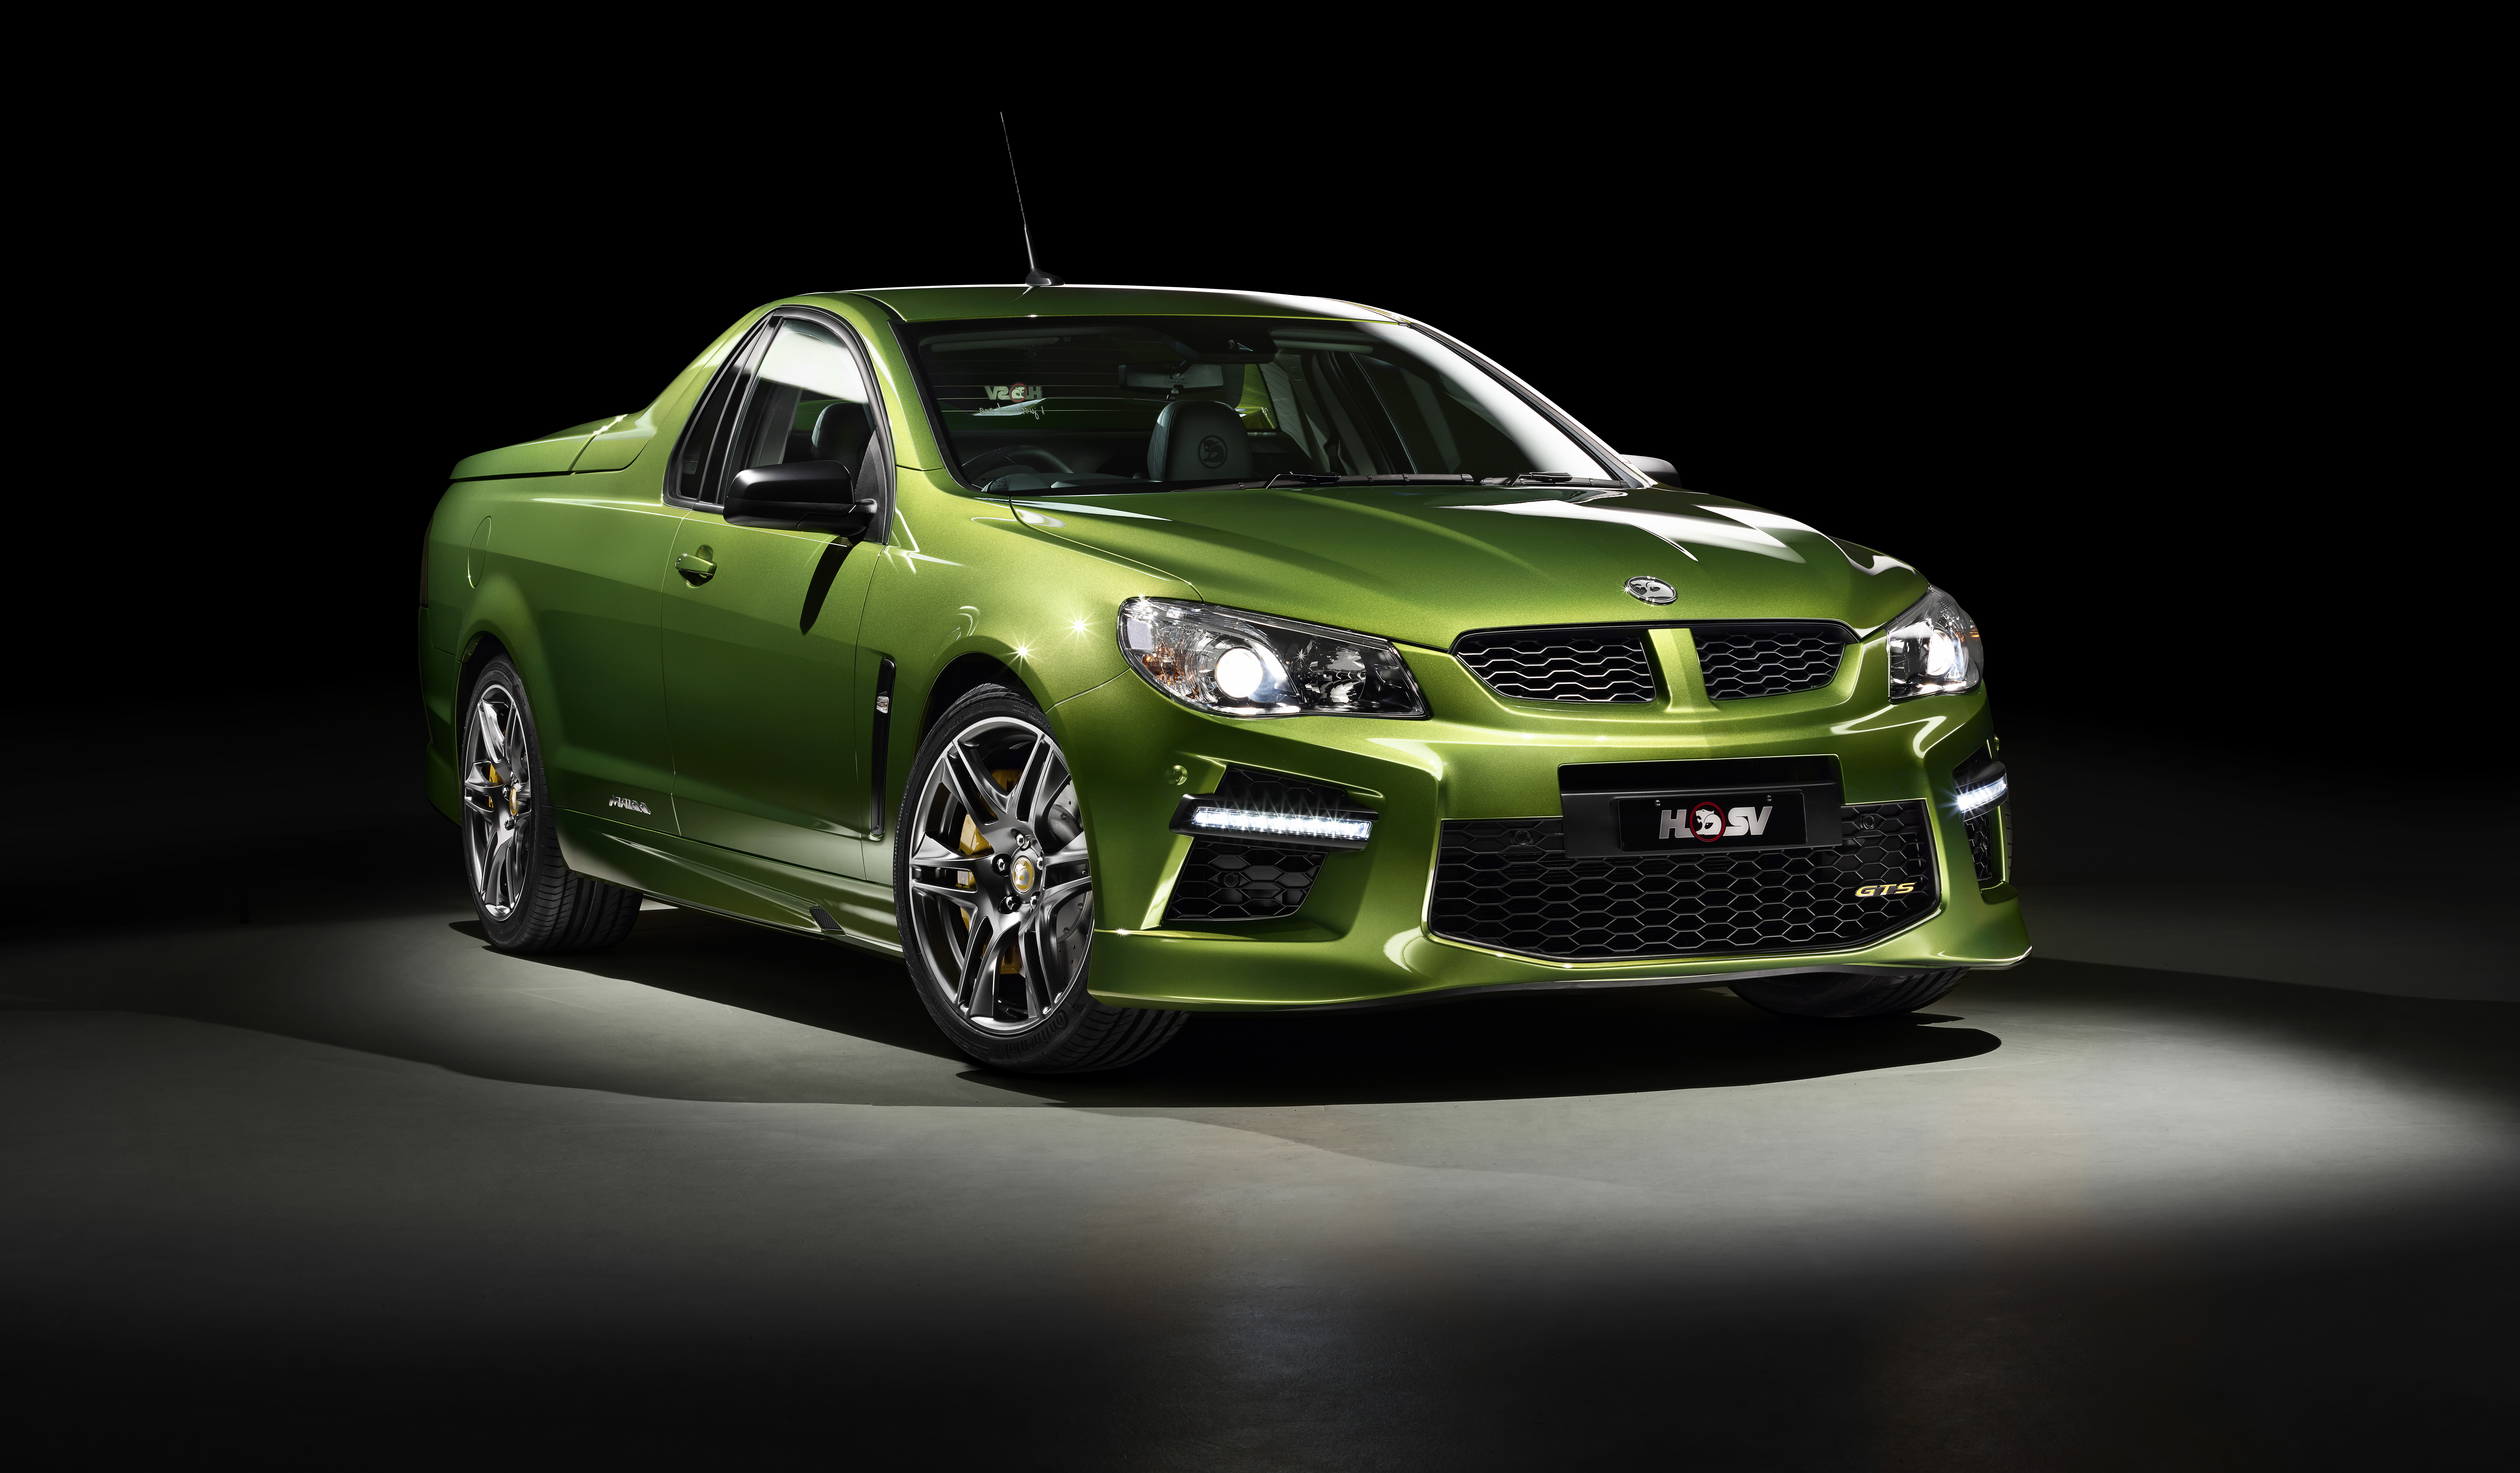 The HSV Maloo GTS is powered by  the same 430kW 6.2 litre Supercharged LSA engine as seen in the Chevrolet Camaro ZL1.